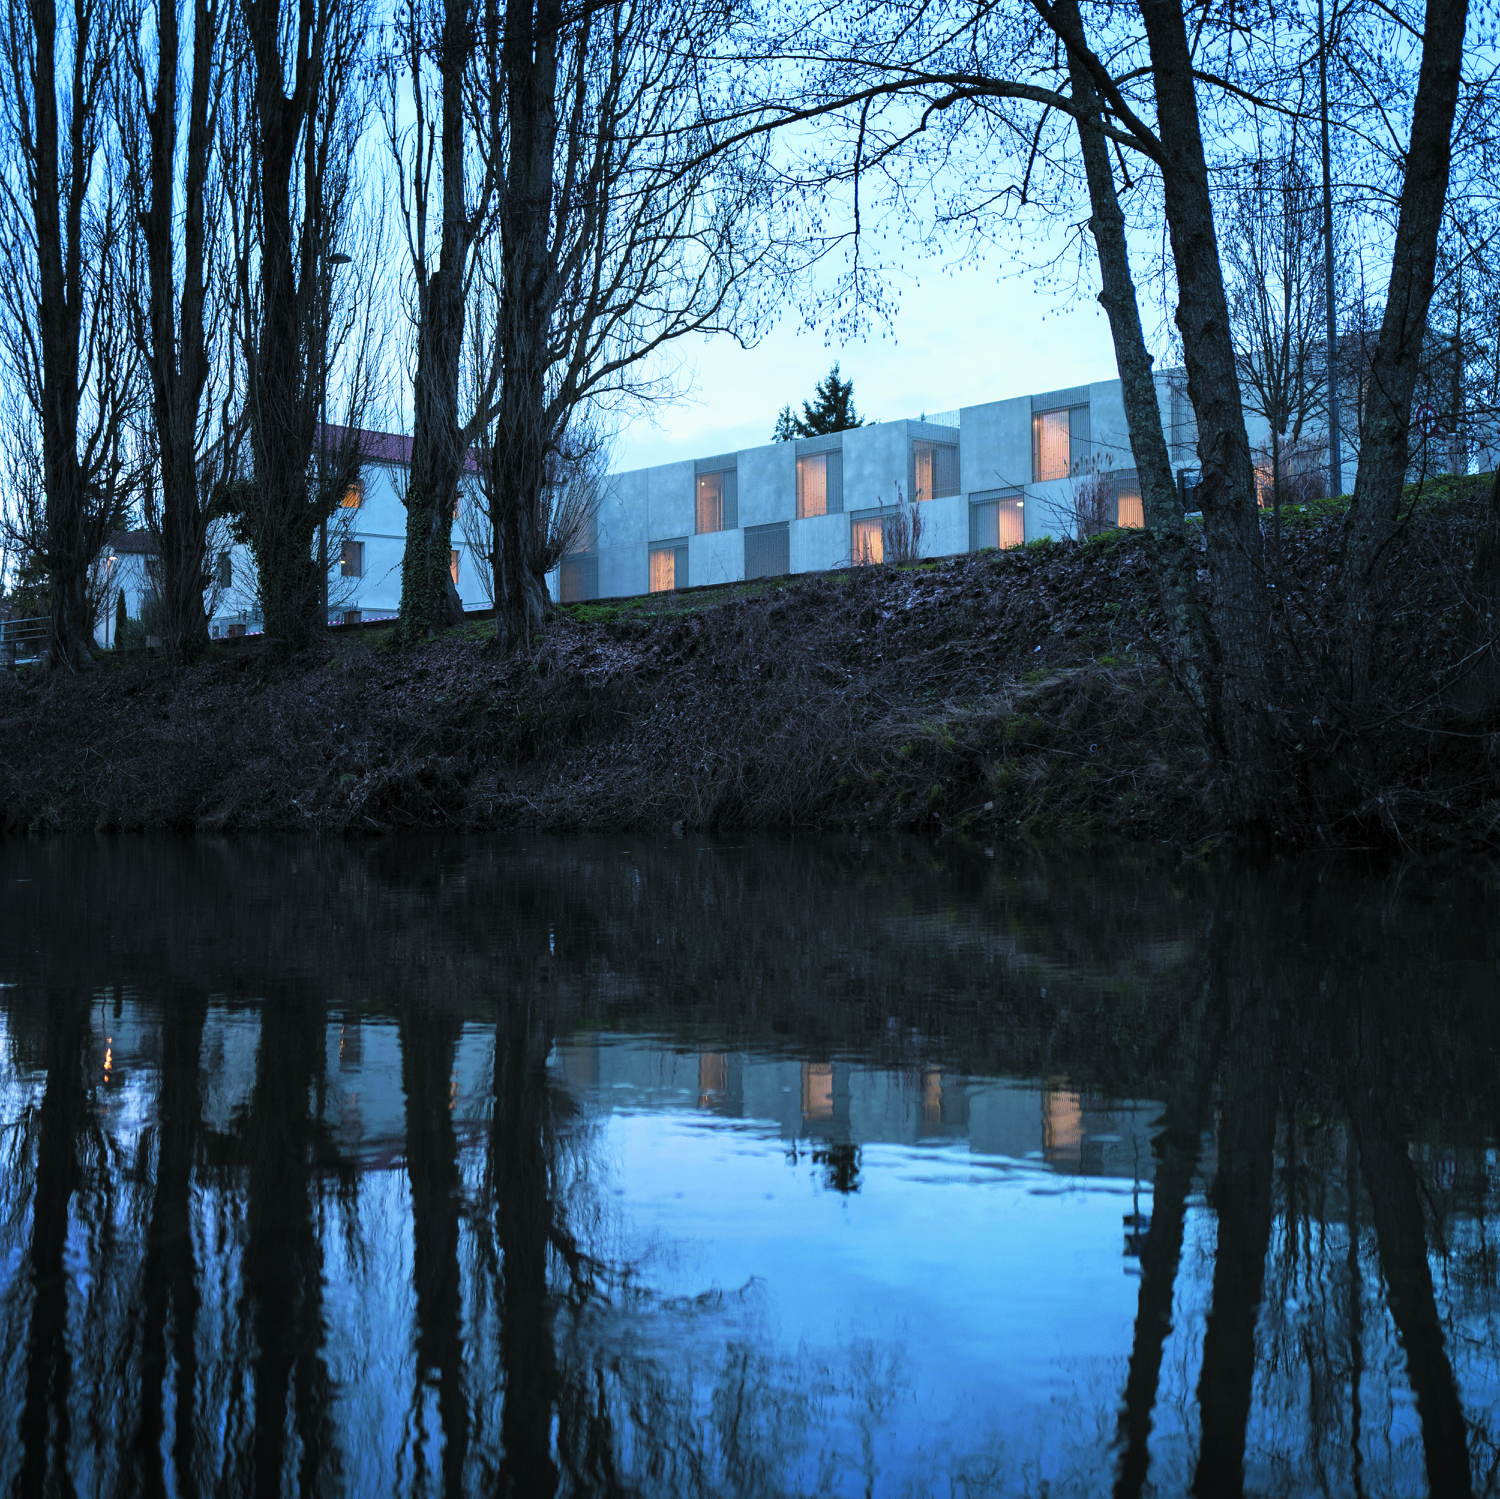 Head Office of the Departmental Federation of Energies, Cahors, France - Image 3